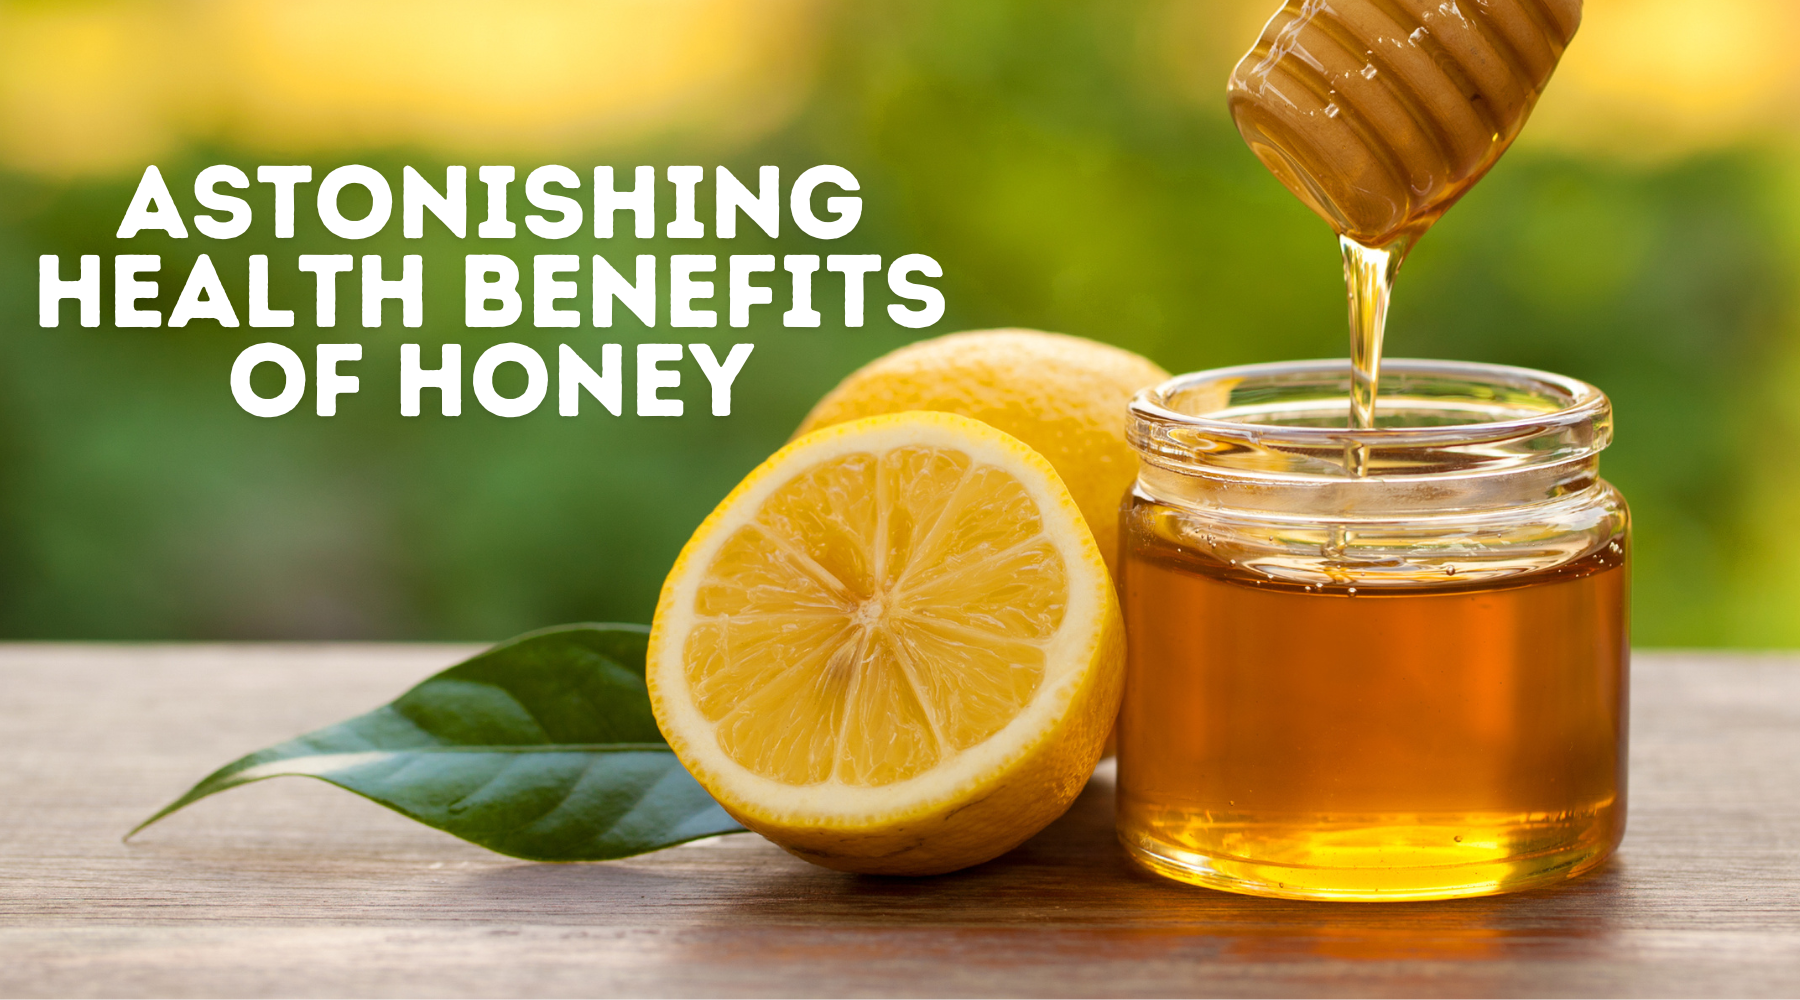 Astonishing Health Benefits of Honey and How it Can Be Great for Your Hair and Skin